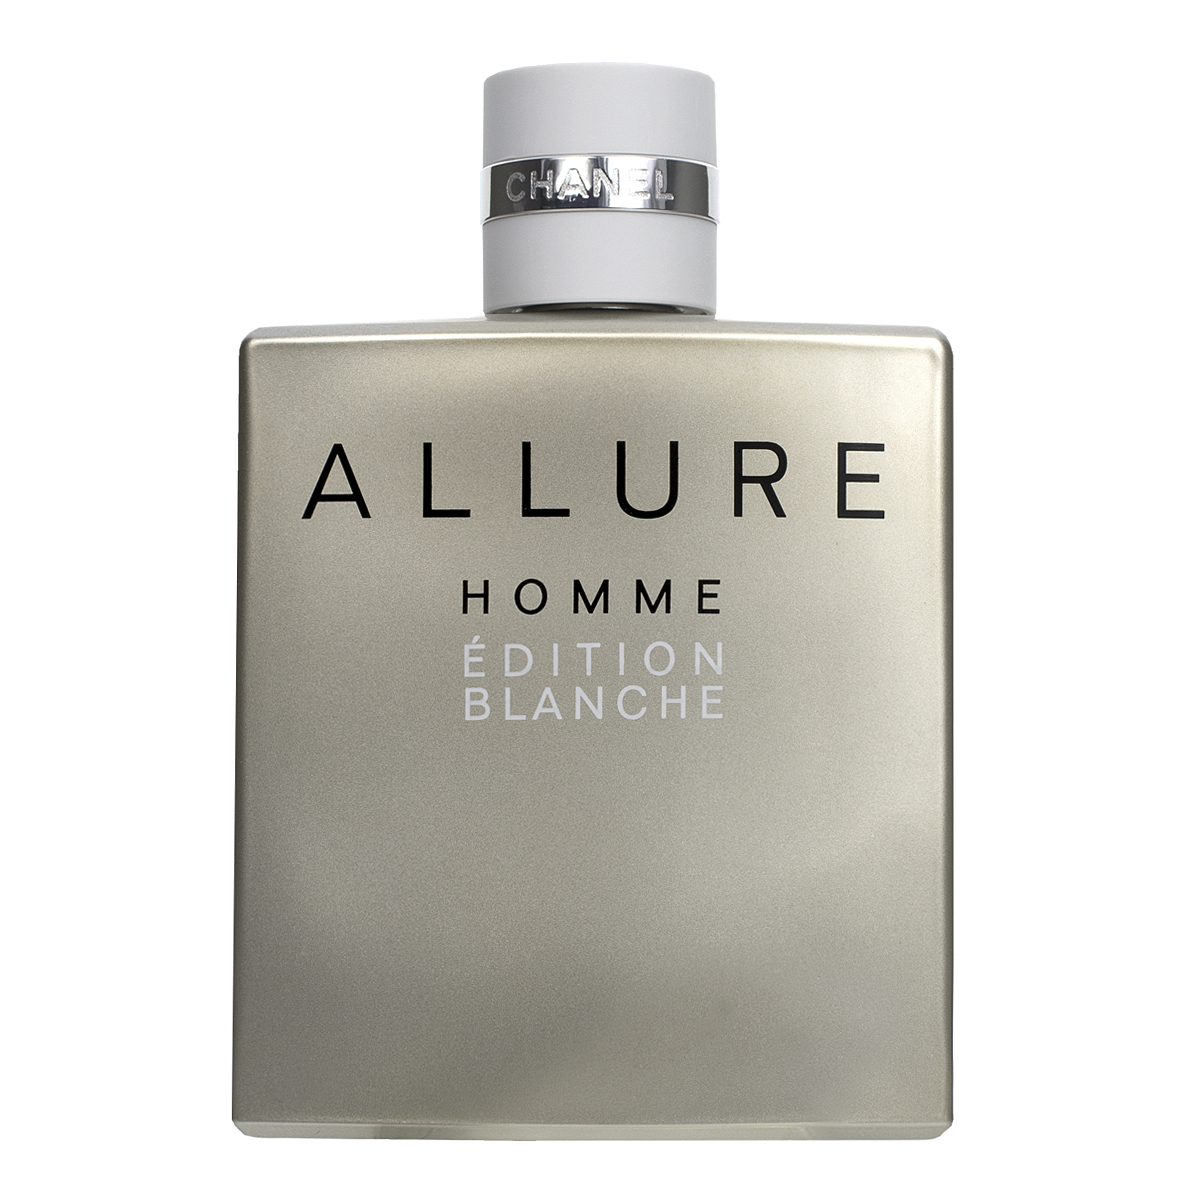 chanel homme edition blanche